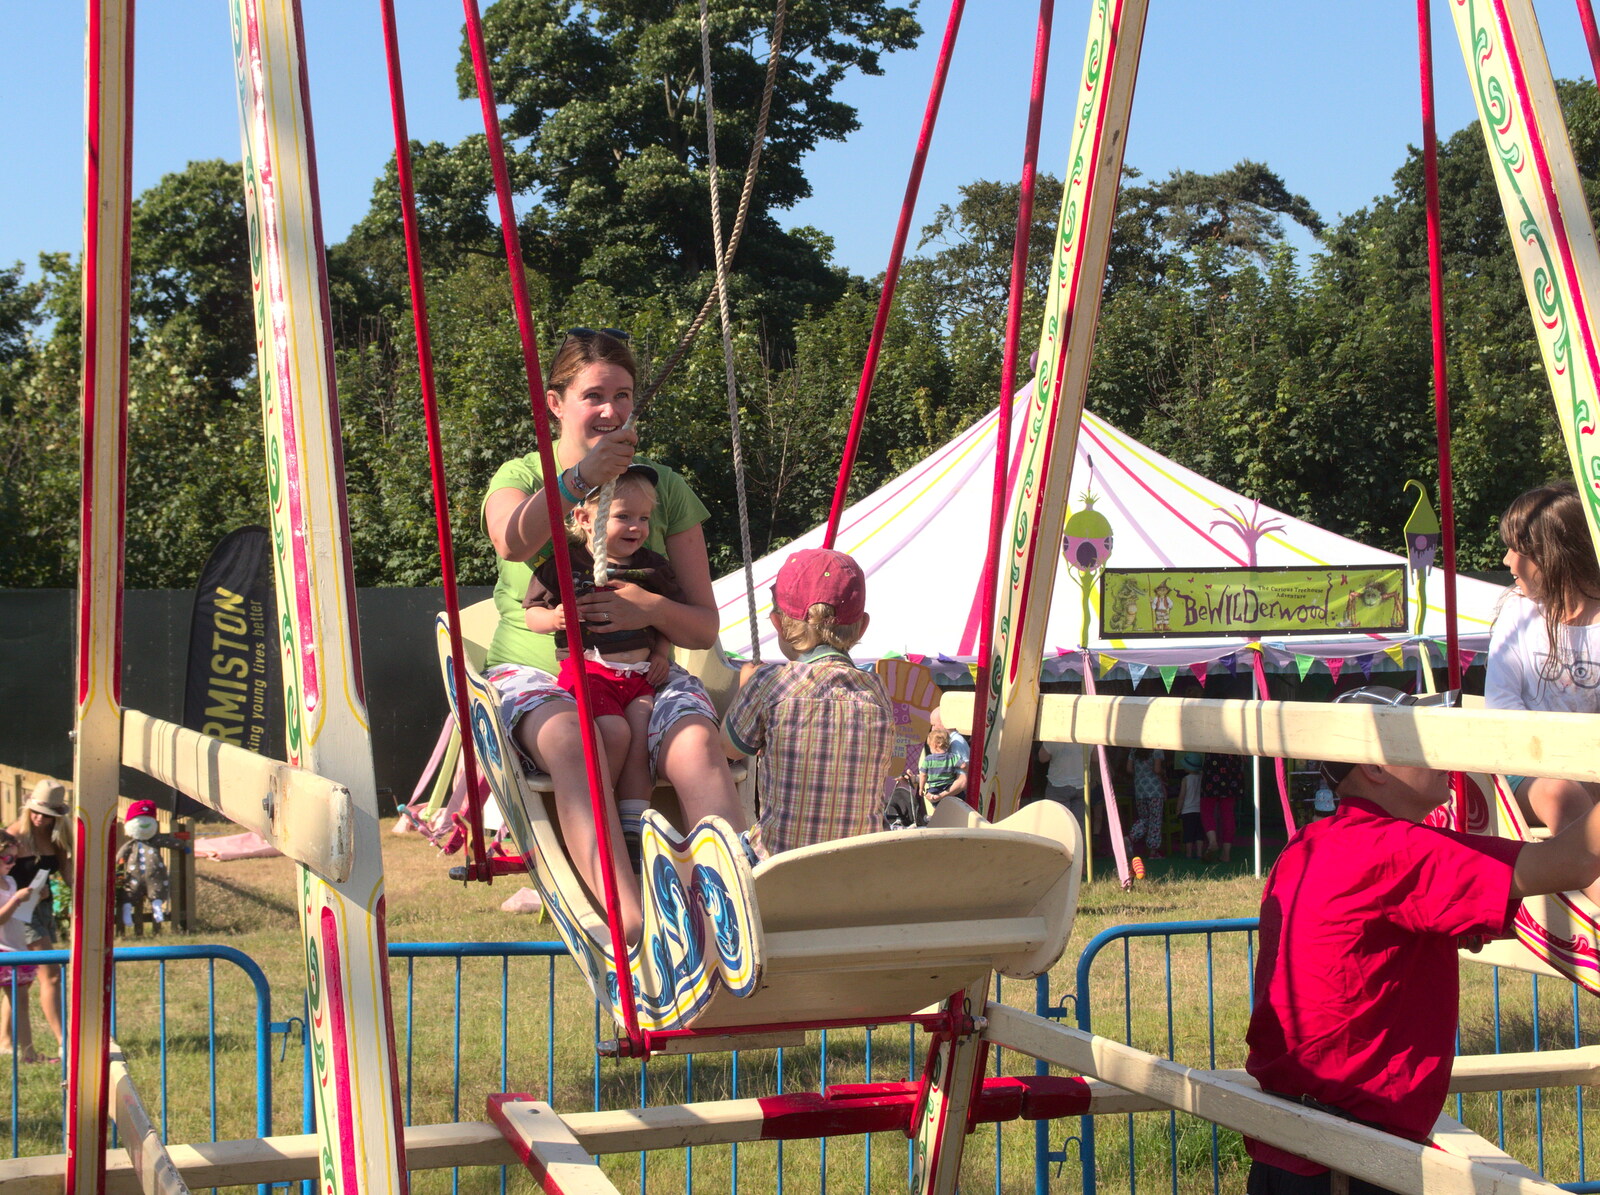 Isobel, Harry and Fred ride on the swing boats from The 8th Latitude Festival, Henham Park, Southwold, Suffolk - 18th July 2013